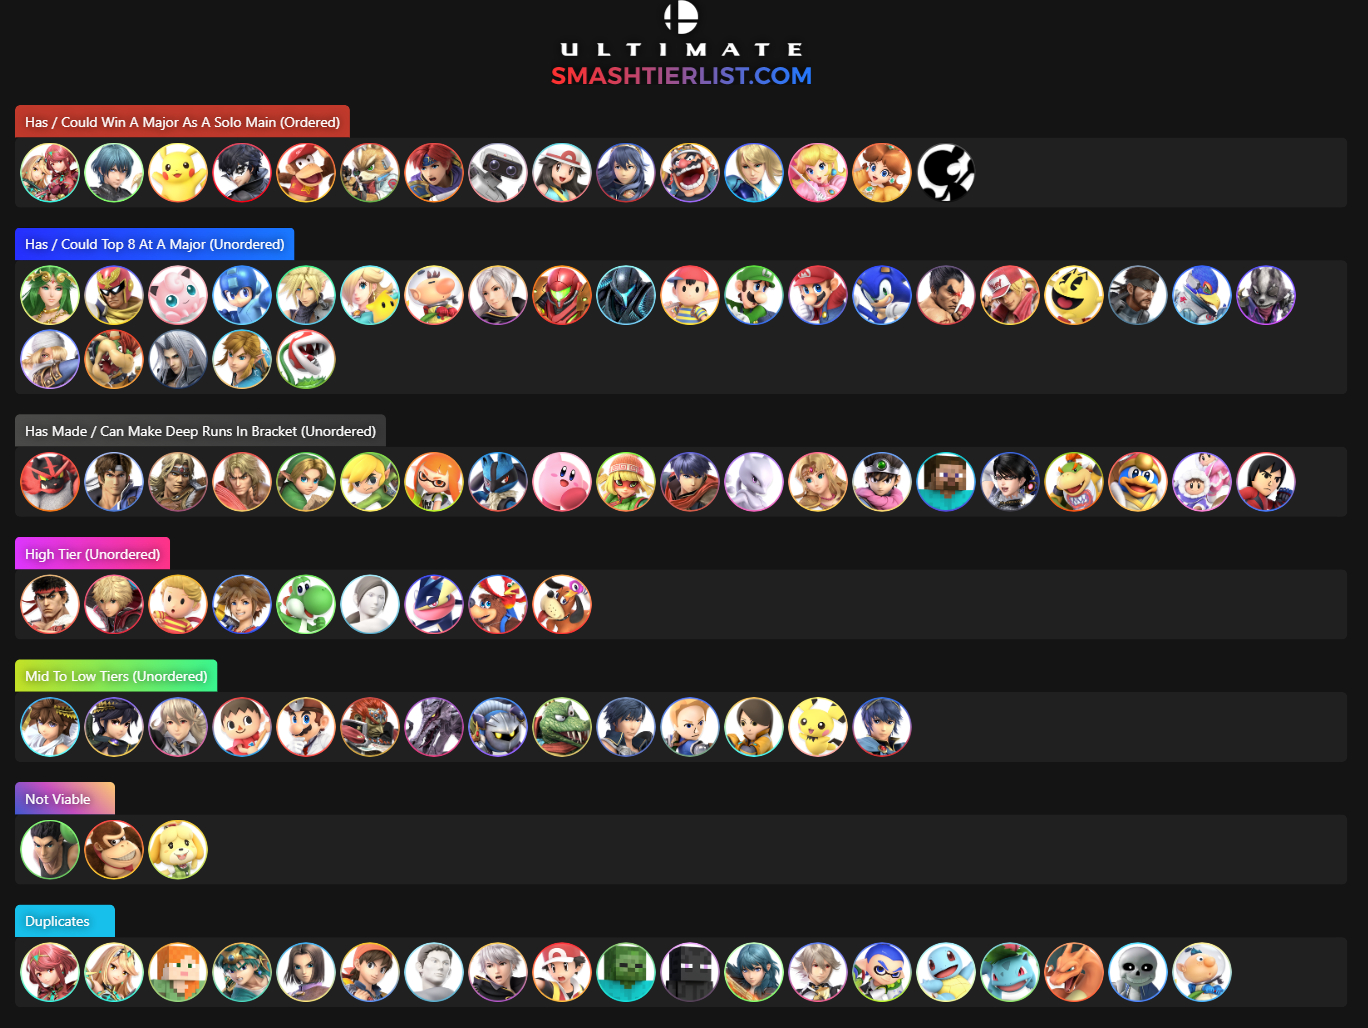 Watherum on Twitter: "My 13.0.1 tier list Top 3 tiers are results based and there definitely bias towards recent results since results on the latest patch are more significant to me.